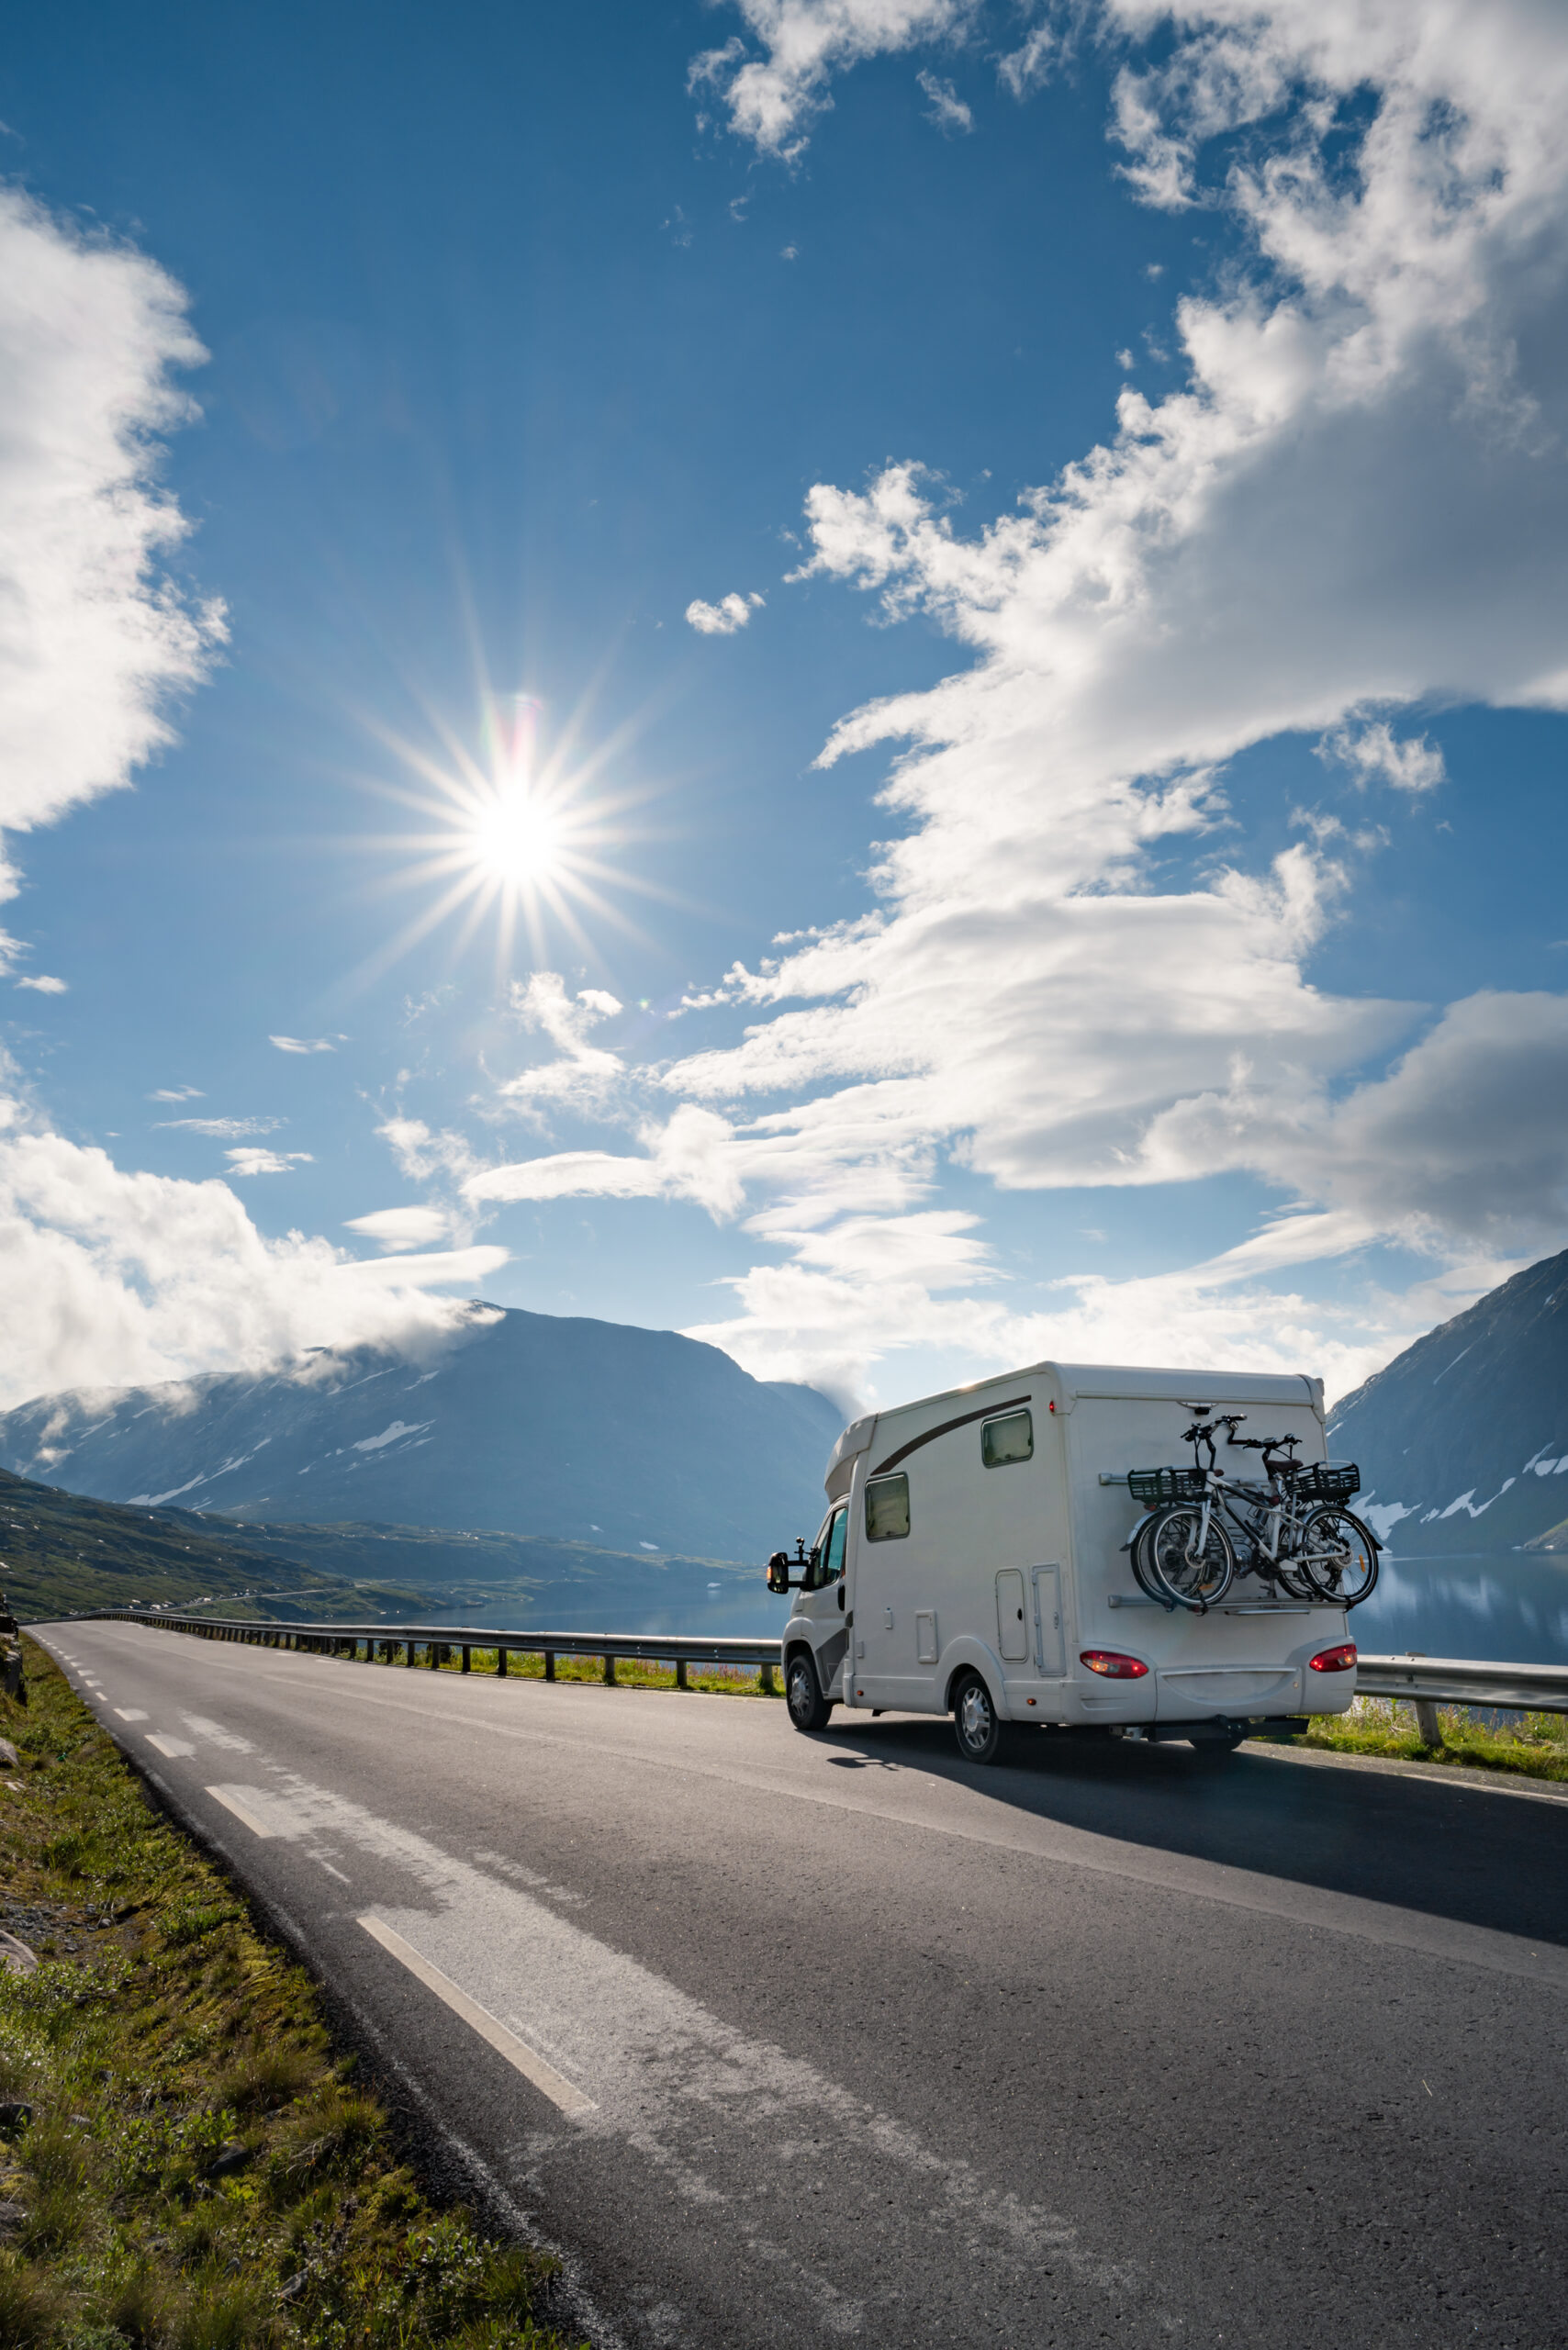 Here are the changes that Europe will implement for the type B motorhome license